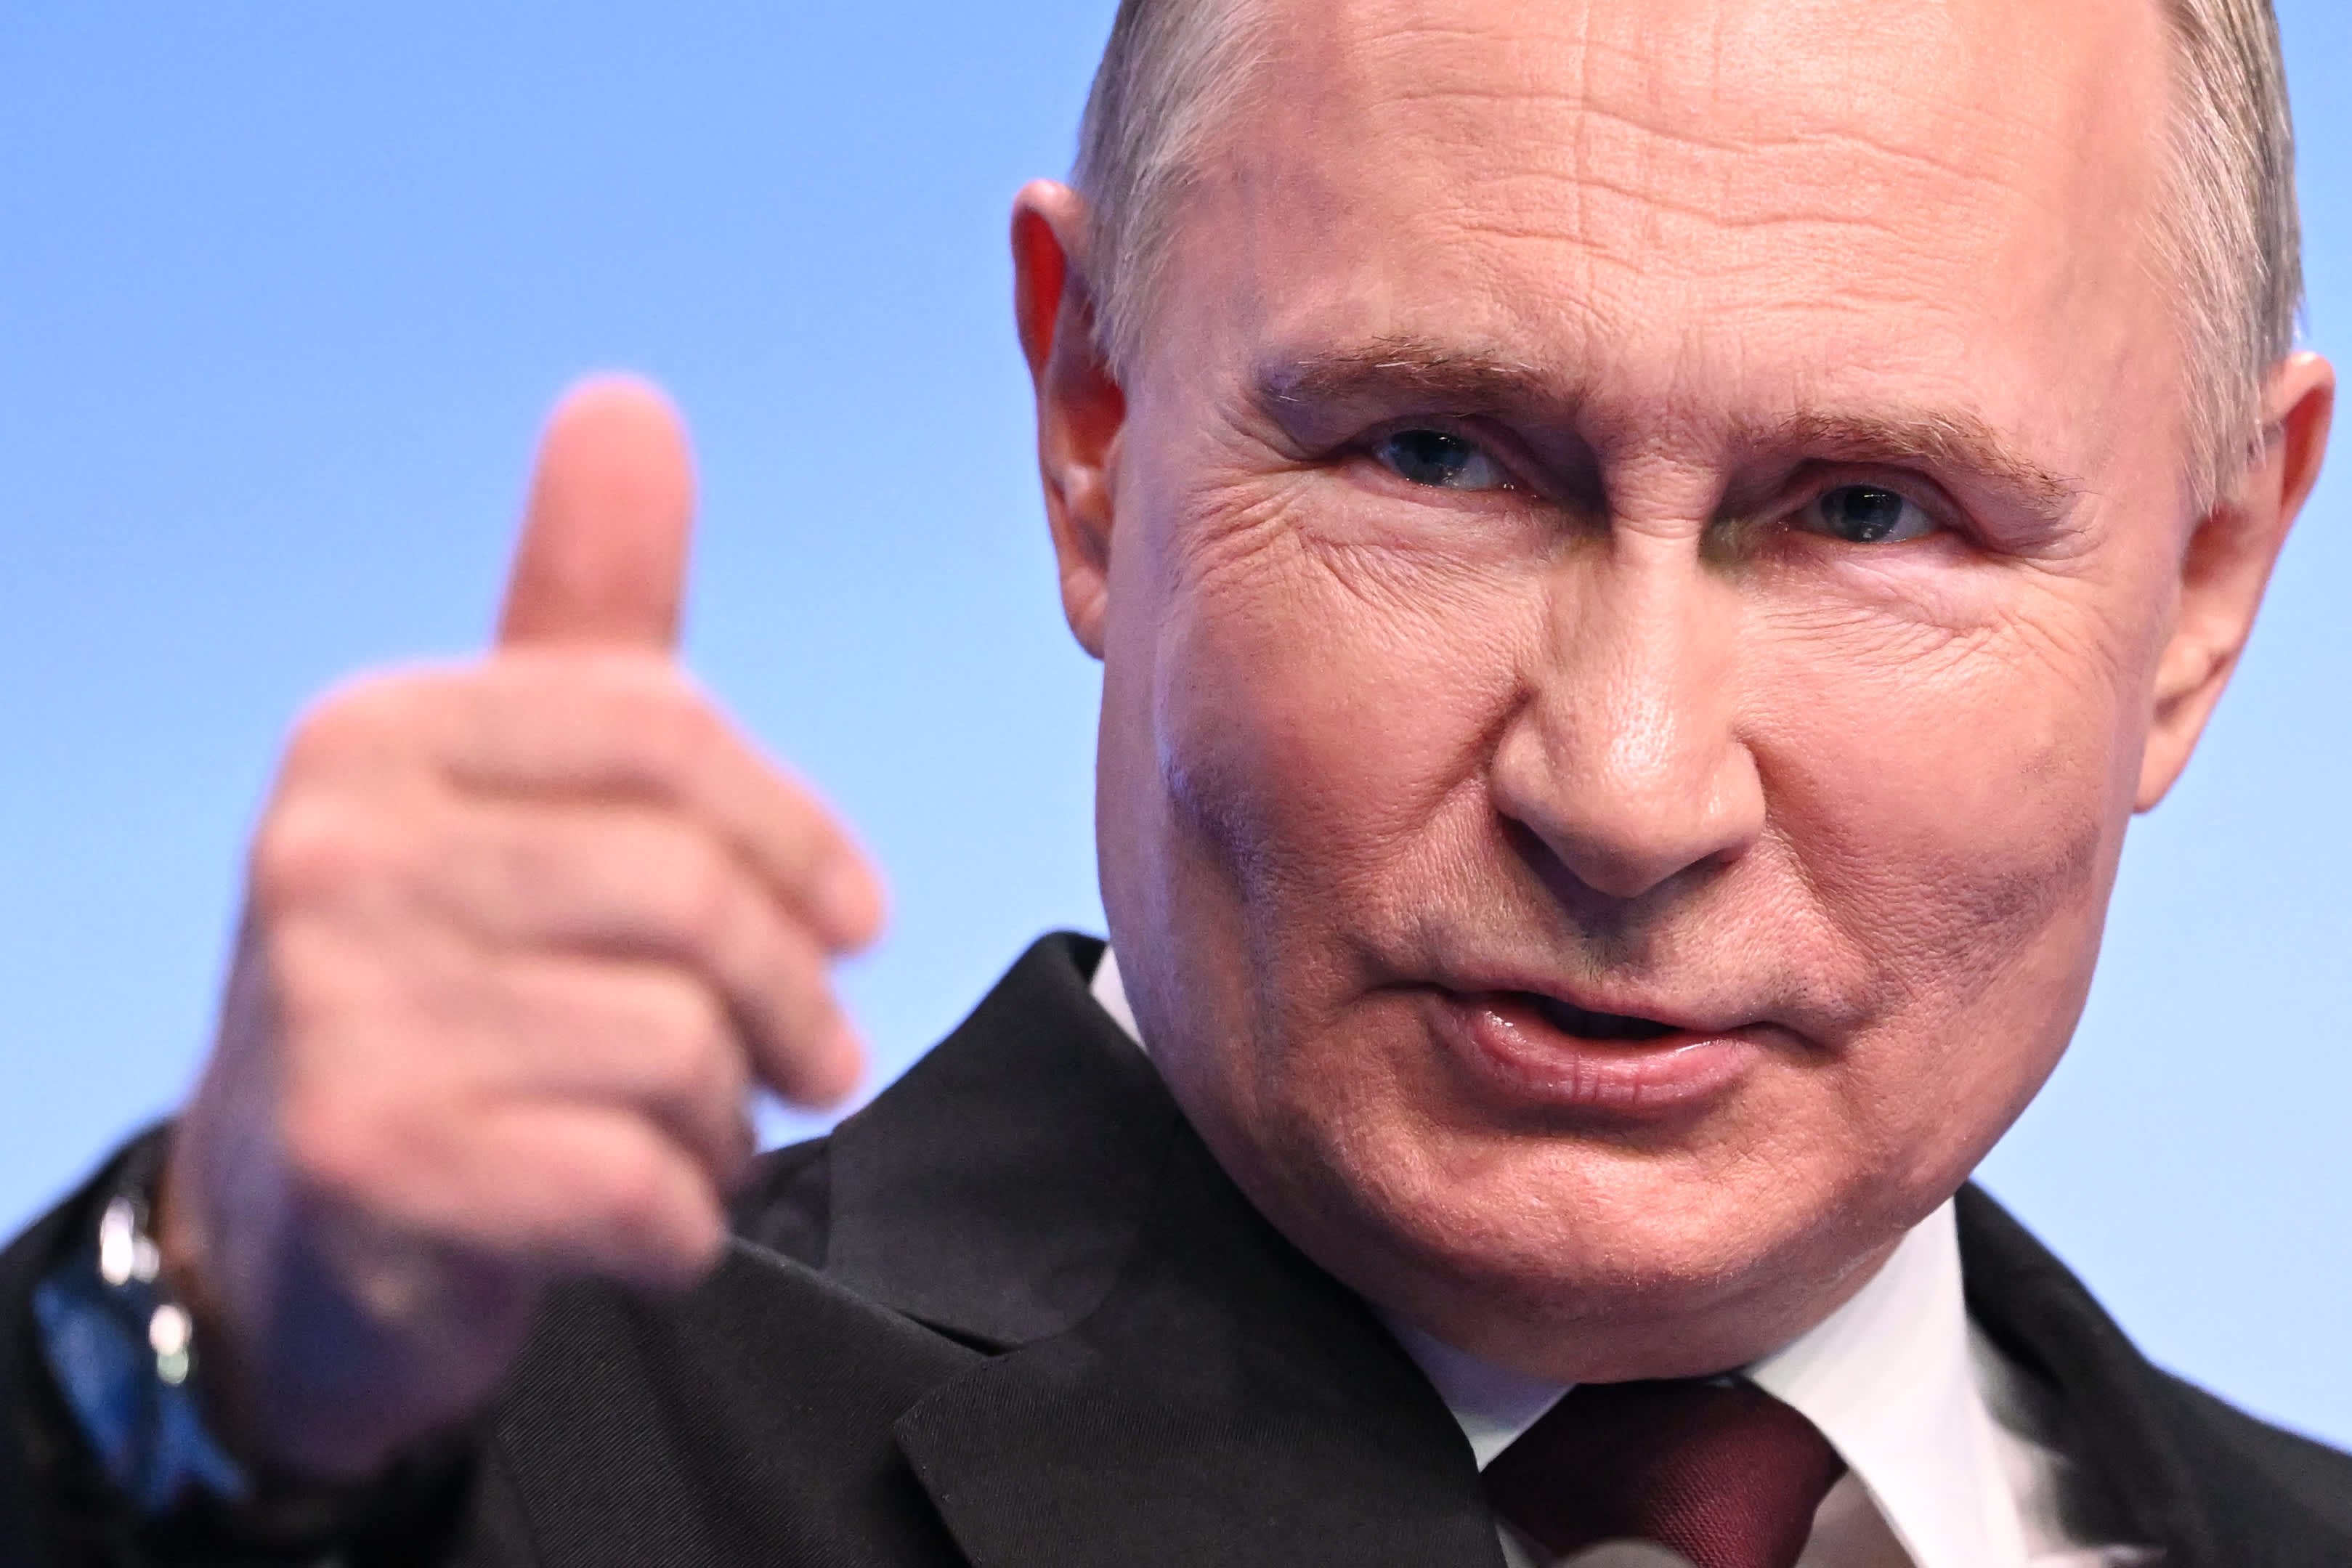 Putin wins the Russian elections and talks about Navalin